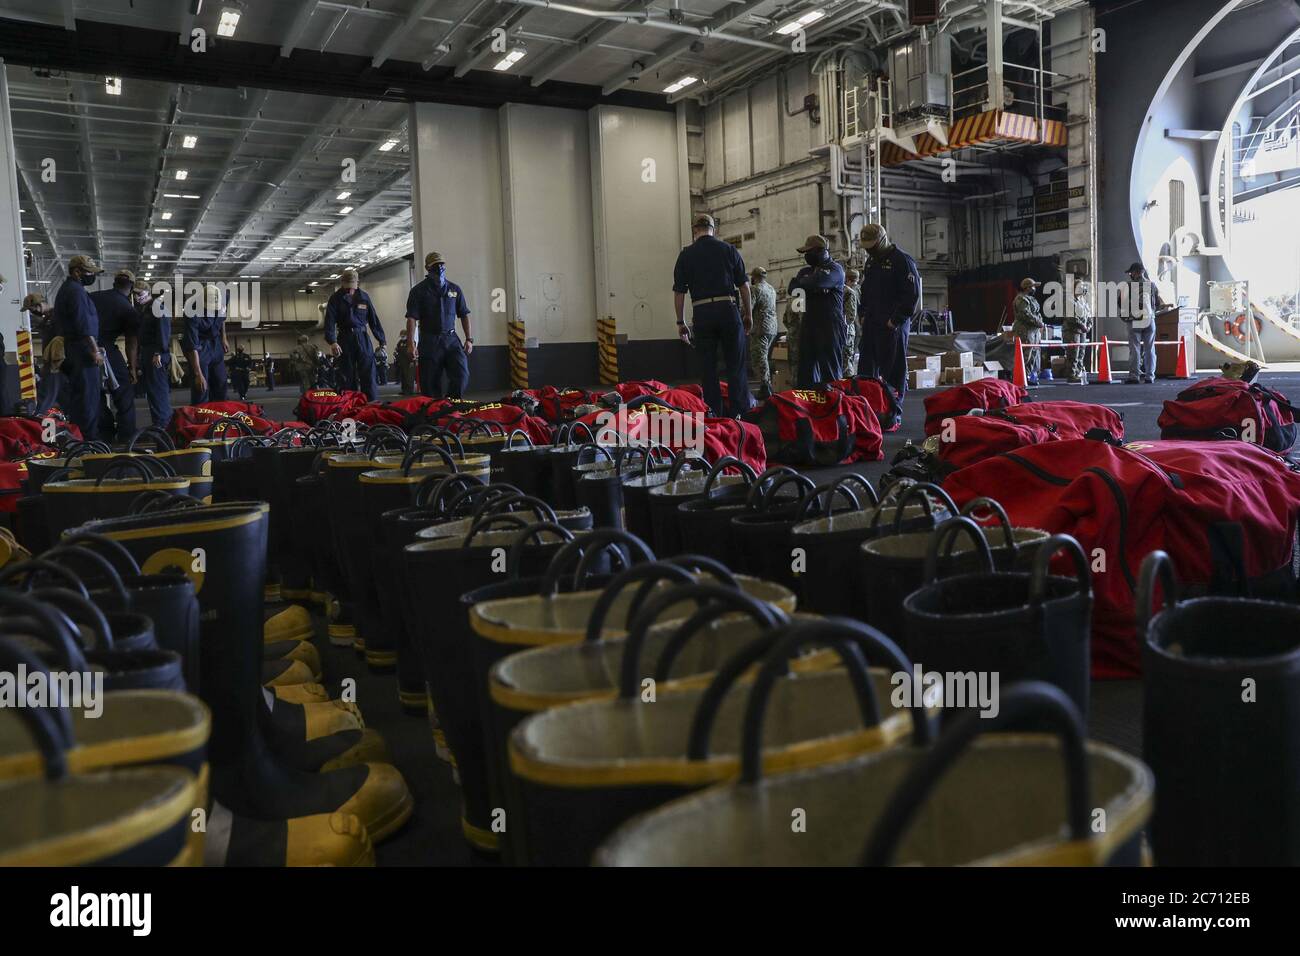 Sailors assigned to USS Abraham Lincoln (CVN 72) gather and inventory equipment to support firefighting efforts aboard the amphibious assault ship USS Bonhomme Richard (LHD 6) on July 12, 2020. Abraham Lincoln is currently moored at Naval Air Station North Island. On the morning of July 12, a fire was called away aboard Bonhomme Richard while it was moored pier side at Naval Base San Diego. Local, base, and shipboard firefighters responded to the fire. Bonhomme Richard is going through a maintenance availability, which began in 2018. Photo by MC3 Darcy McAtee/U.S. Navy/UPI Stock Photo